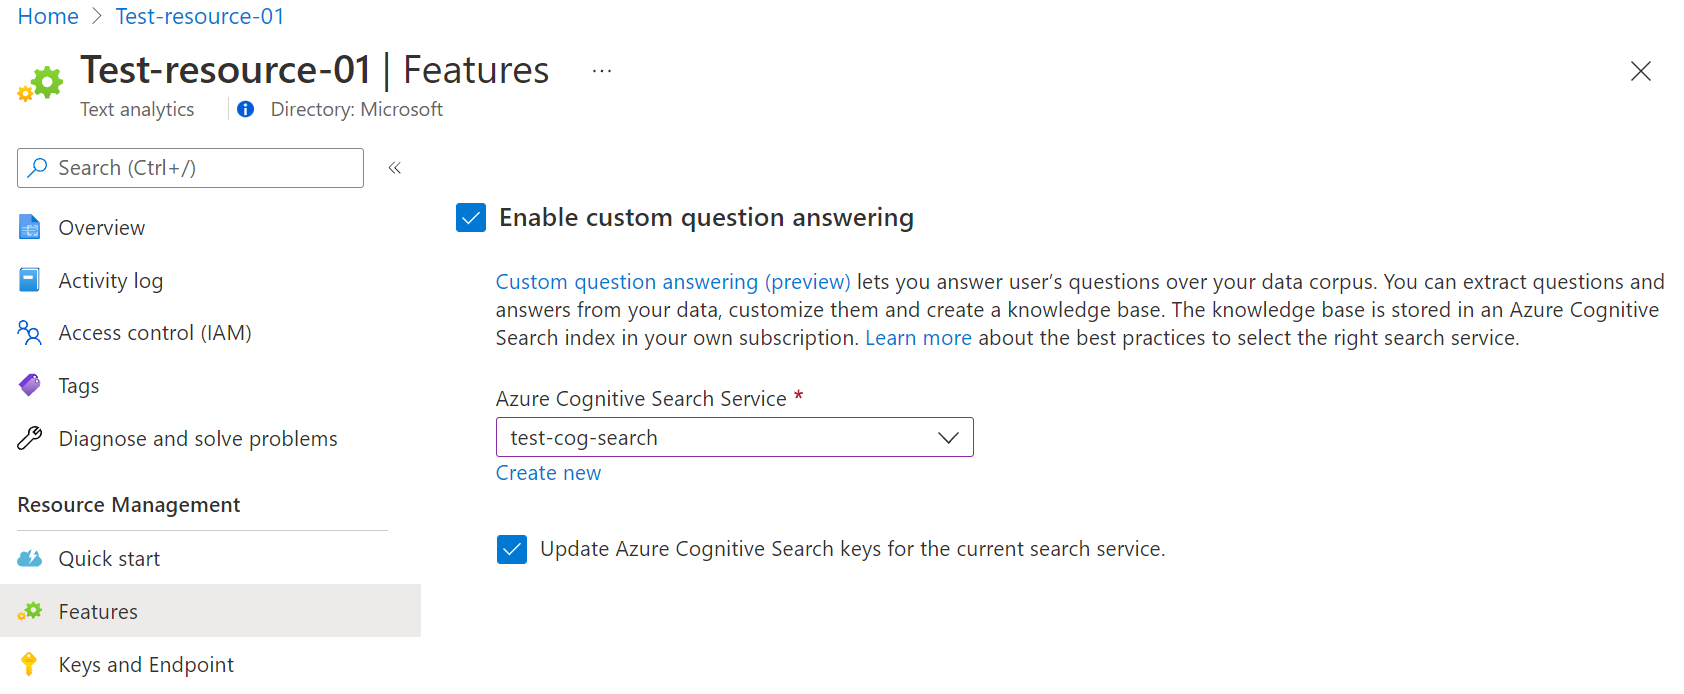 Enable custom question answering